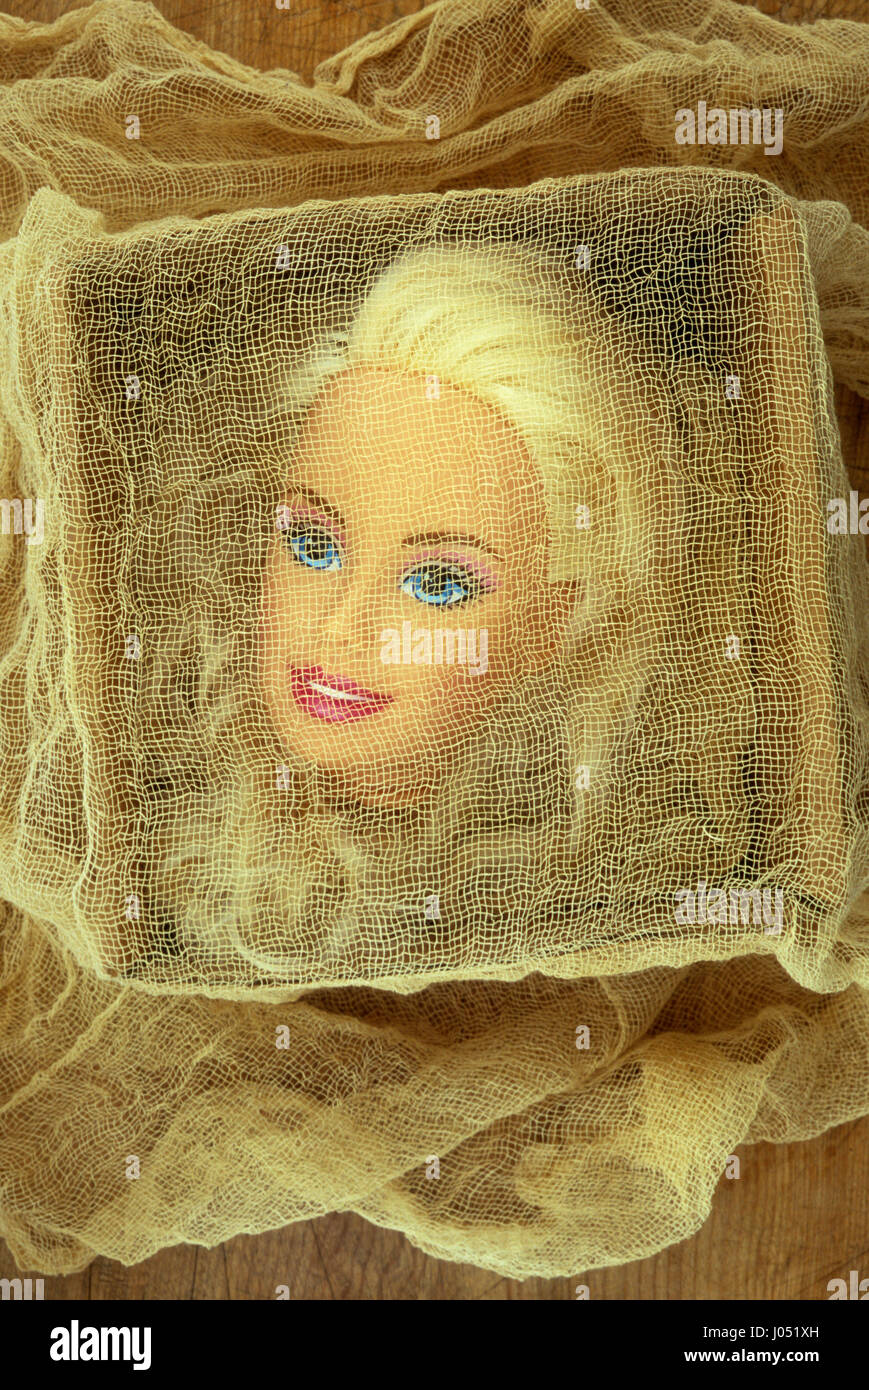 Head of glamorous contemporary doll with blonde hair blue eyes and pink lipstick lying in box covered with gauzy material Stock Photo